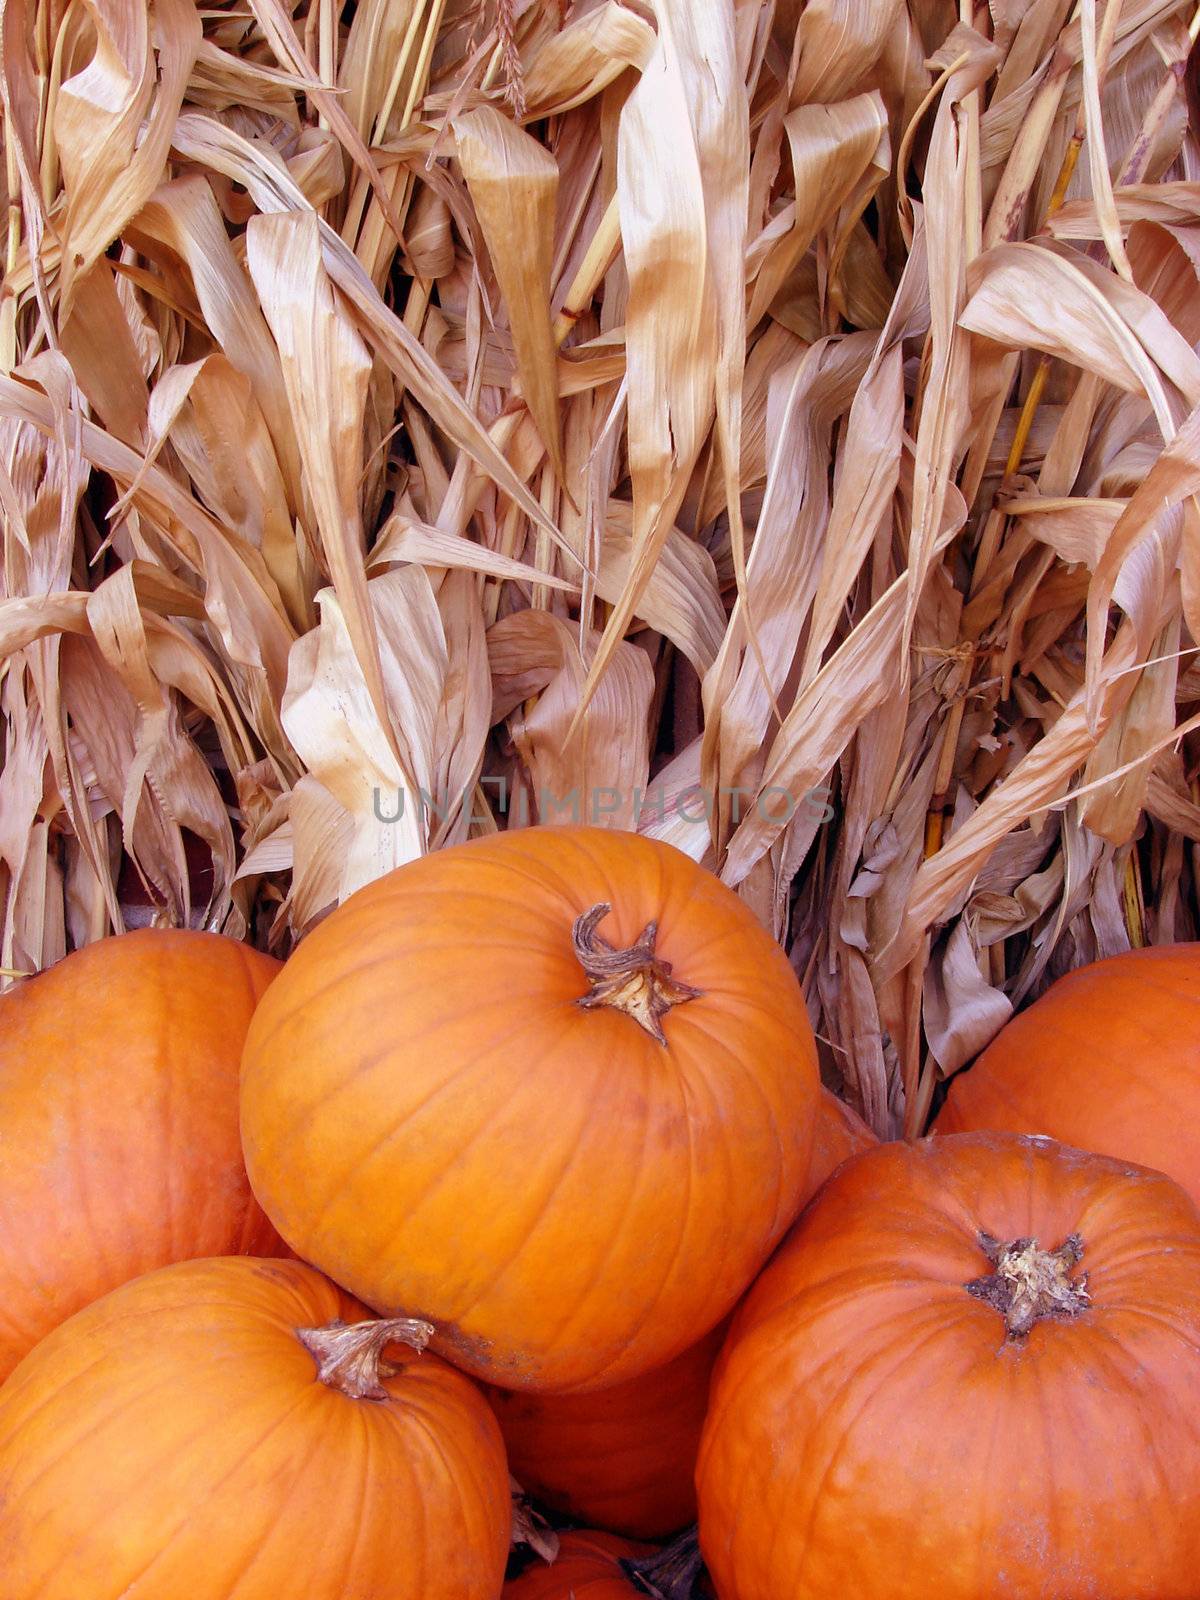 Pumpkins and dry corn stalk in autumn